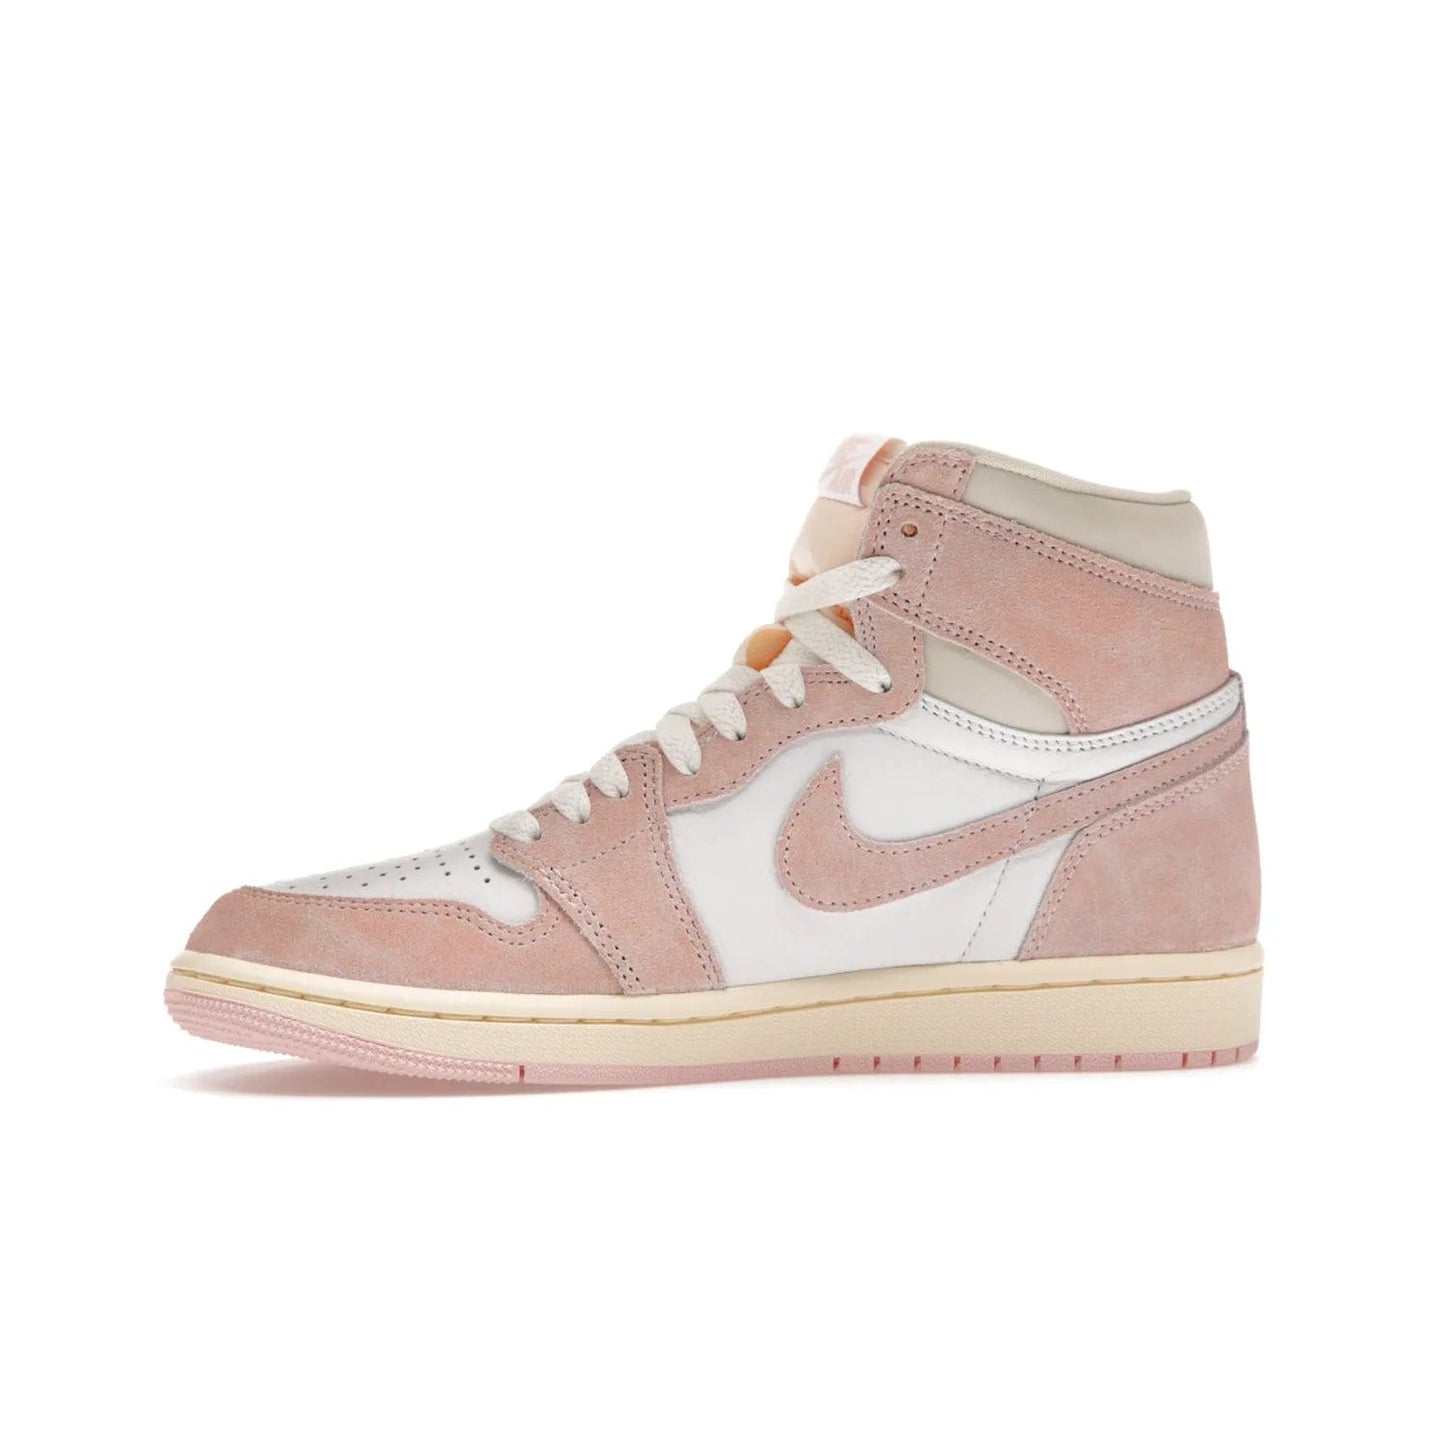 Jordan 1 Retro High OG Washed Pink (Women's) - Image 18 - Only at www.BallersClubKickz.com - Iconic Air Jordan 1 Retro High OG for women with unique pink suede and white leather uppers. Get the timeless look on April 22, 2023.